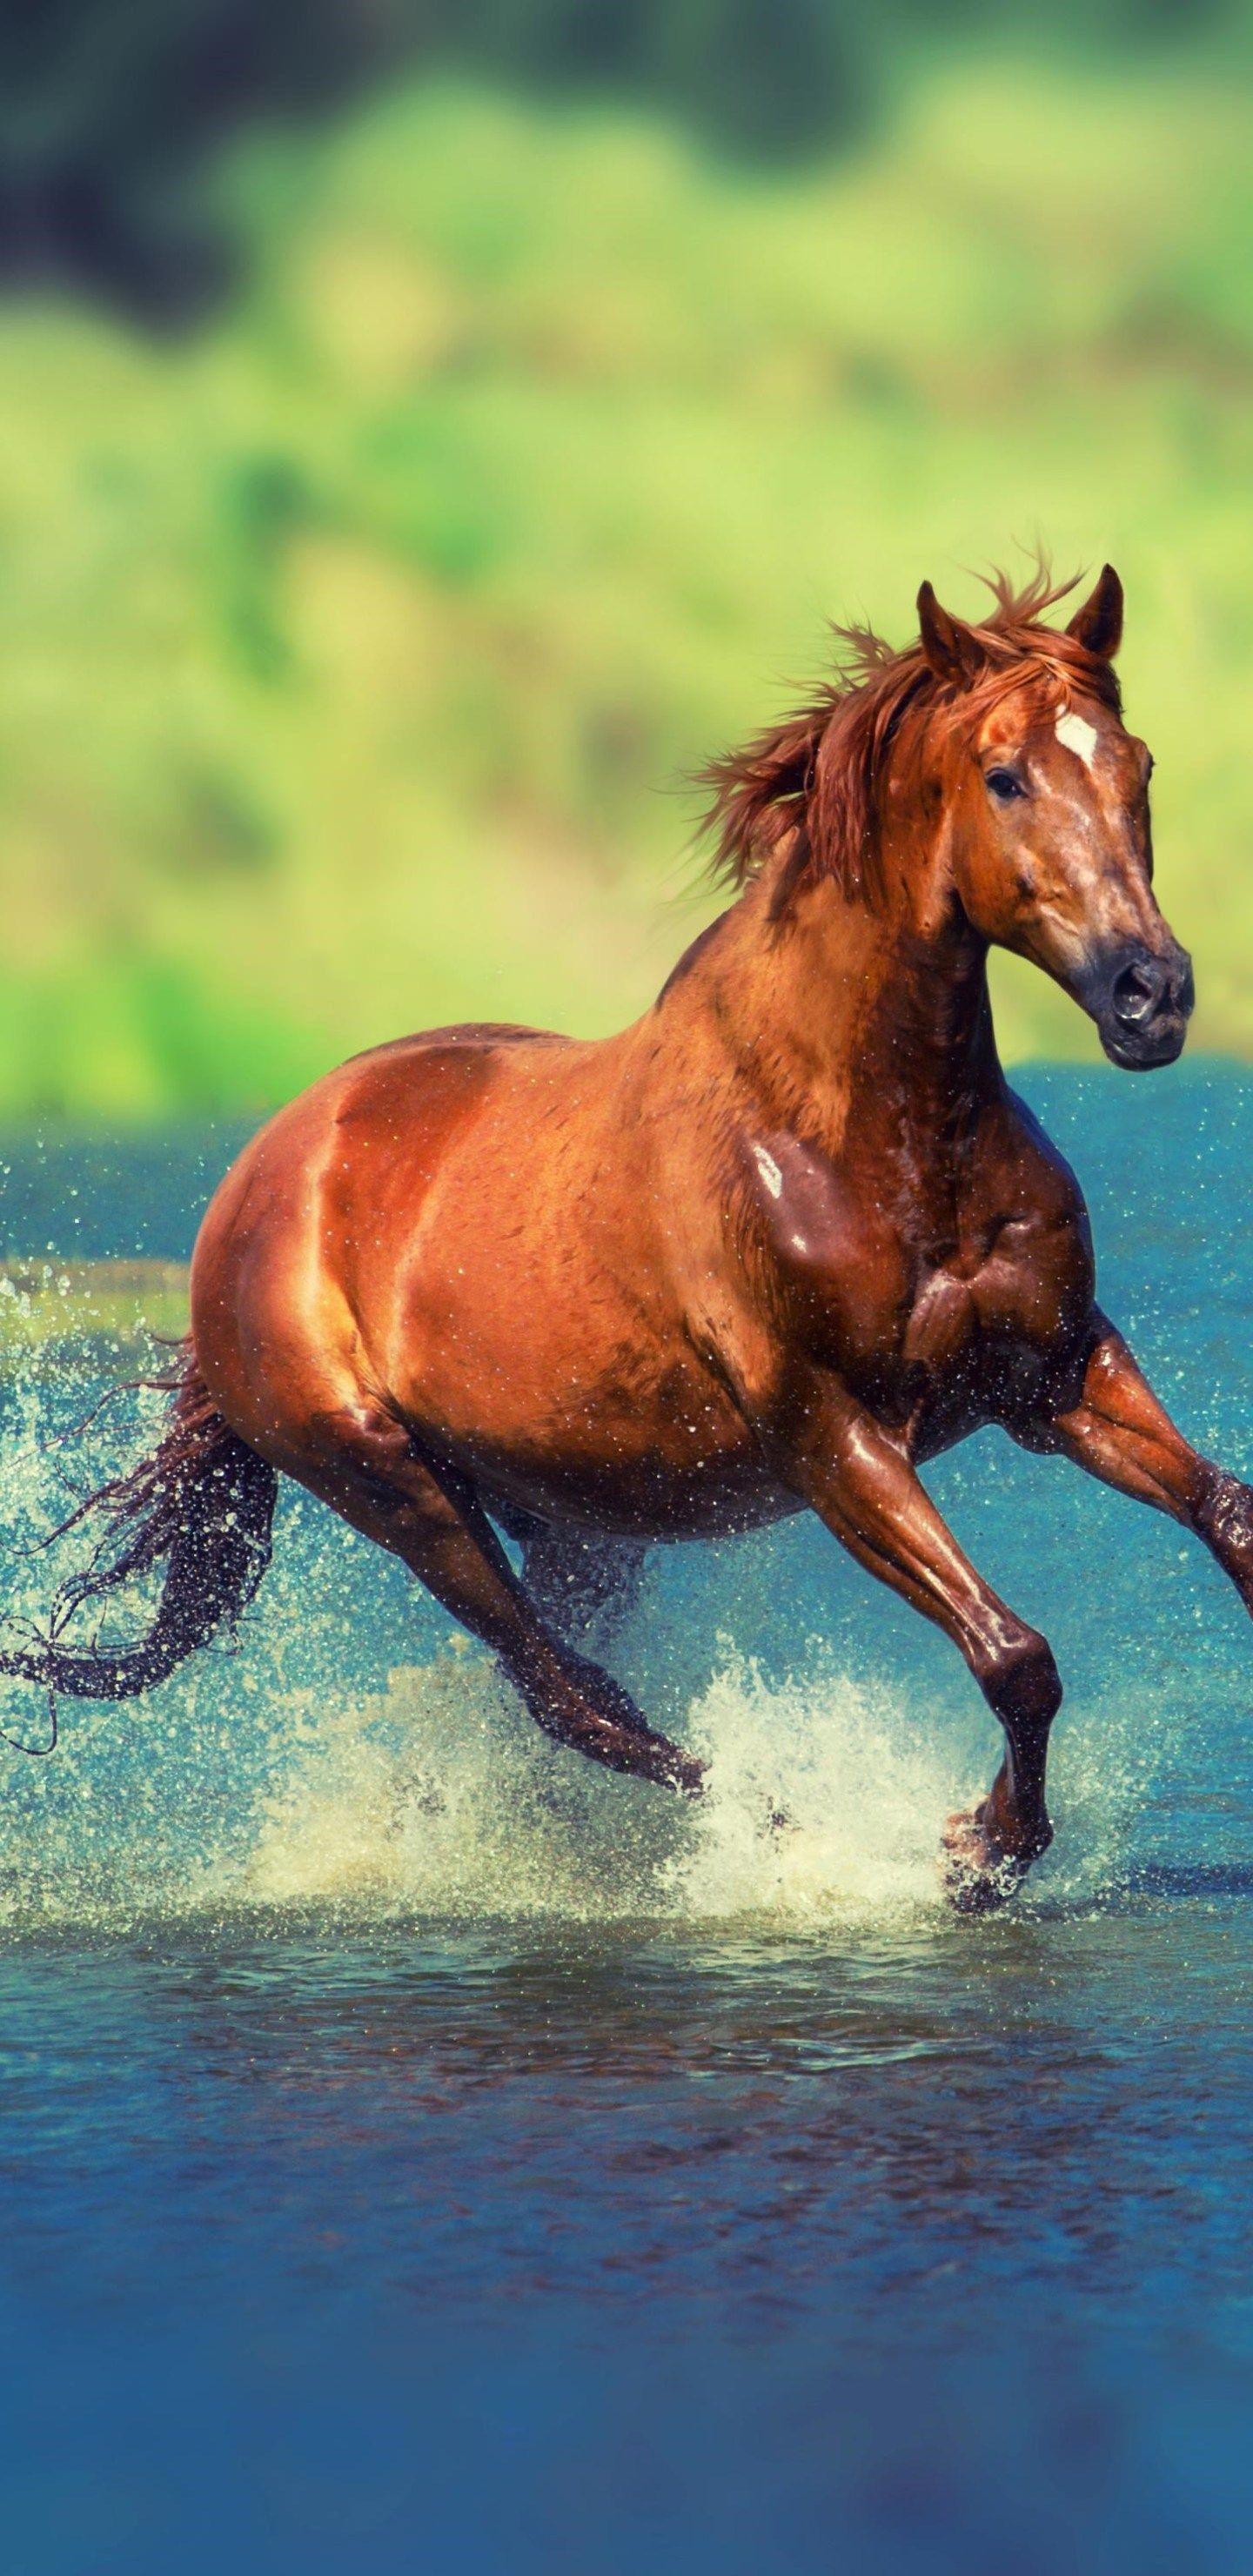 Running Horse In Water Samsung Galaxy Note S S S